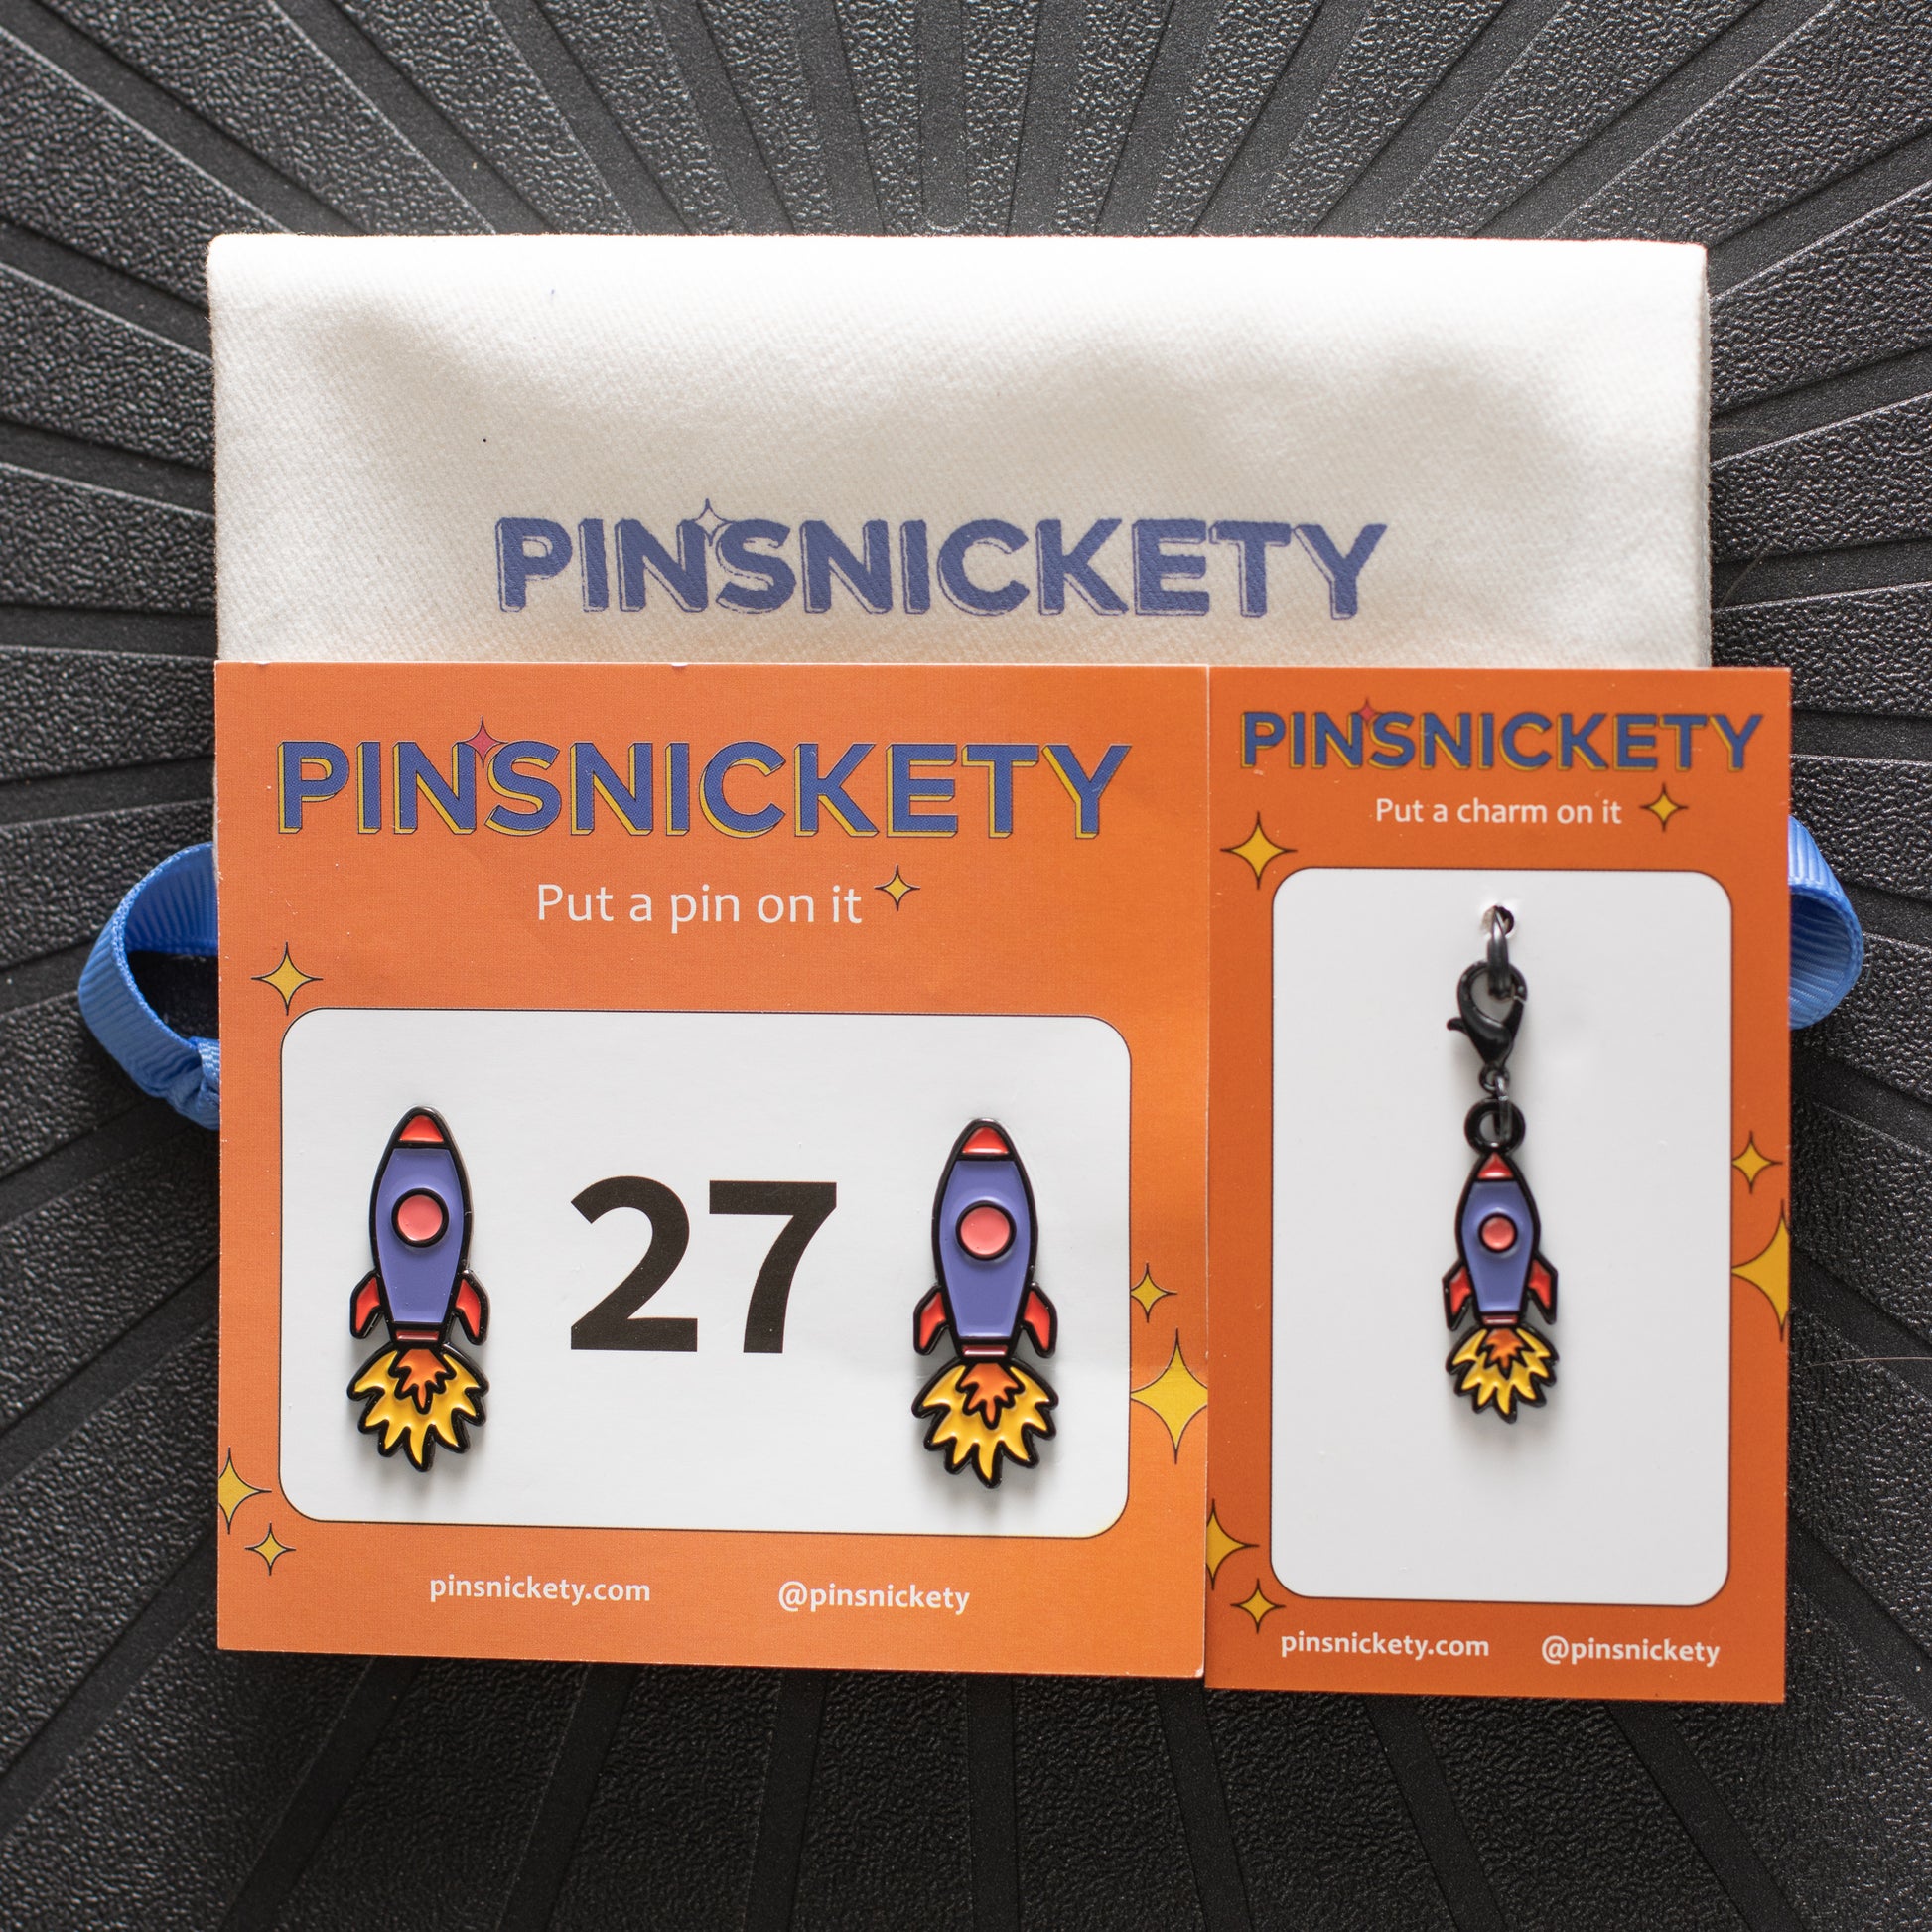 Pinsnickety rocket ship horse show number pins and charm on their product packaging cards